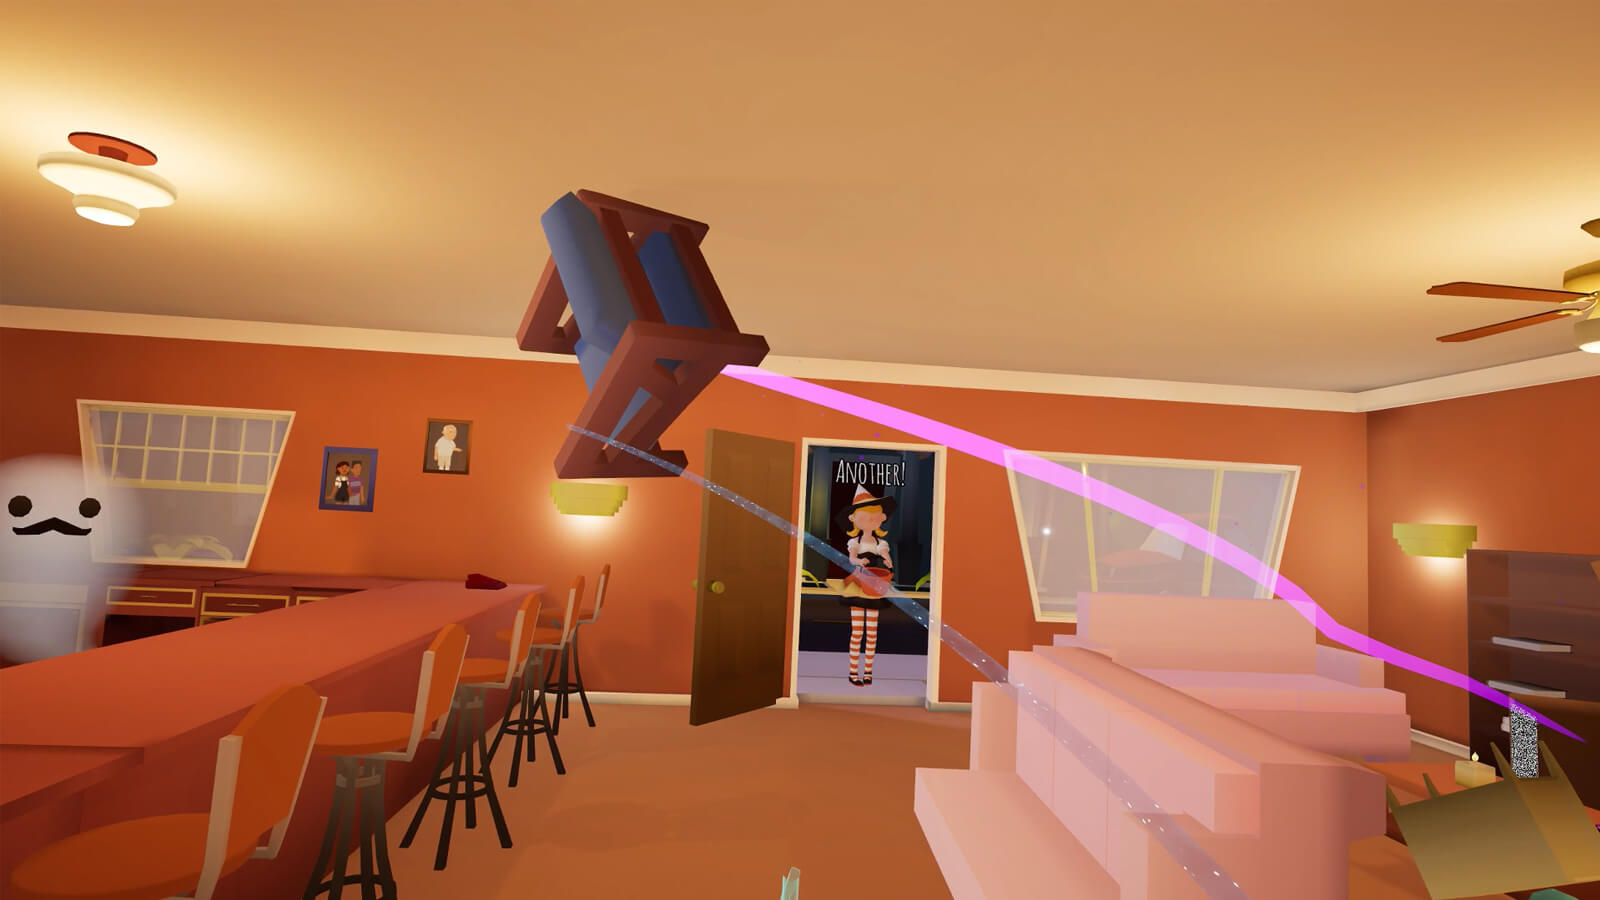 The player throws a chair across a living room, a trick or treater stands in the doorway.